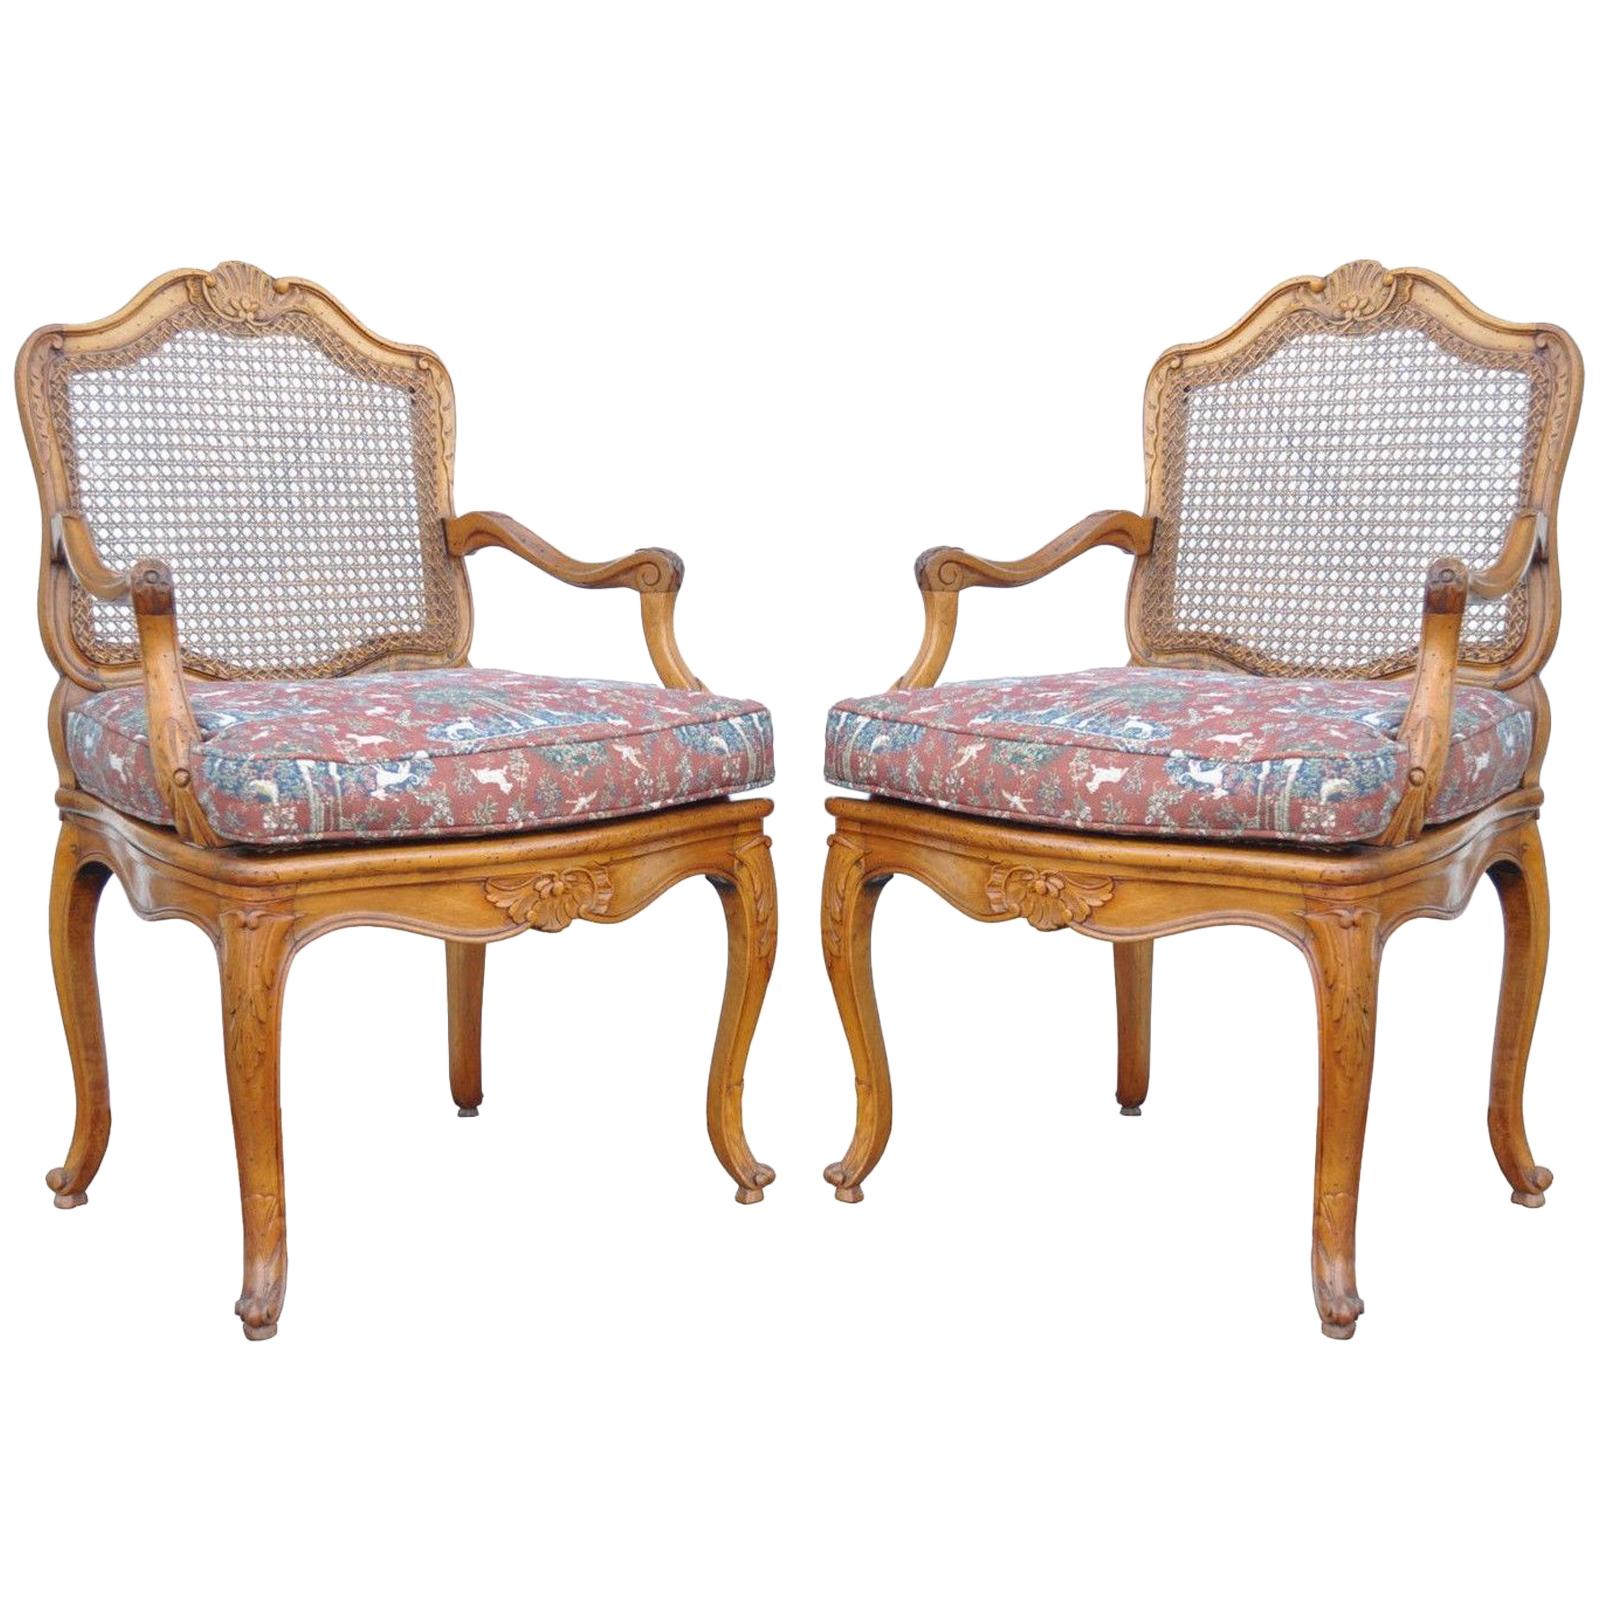 Vintage French Country Louis XV Style Carved Cane Back Fauteuil Armchairs, Pair